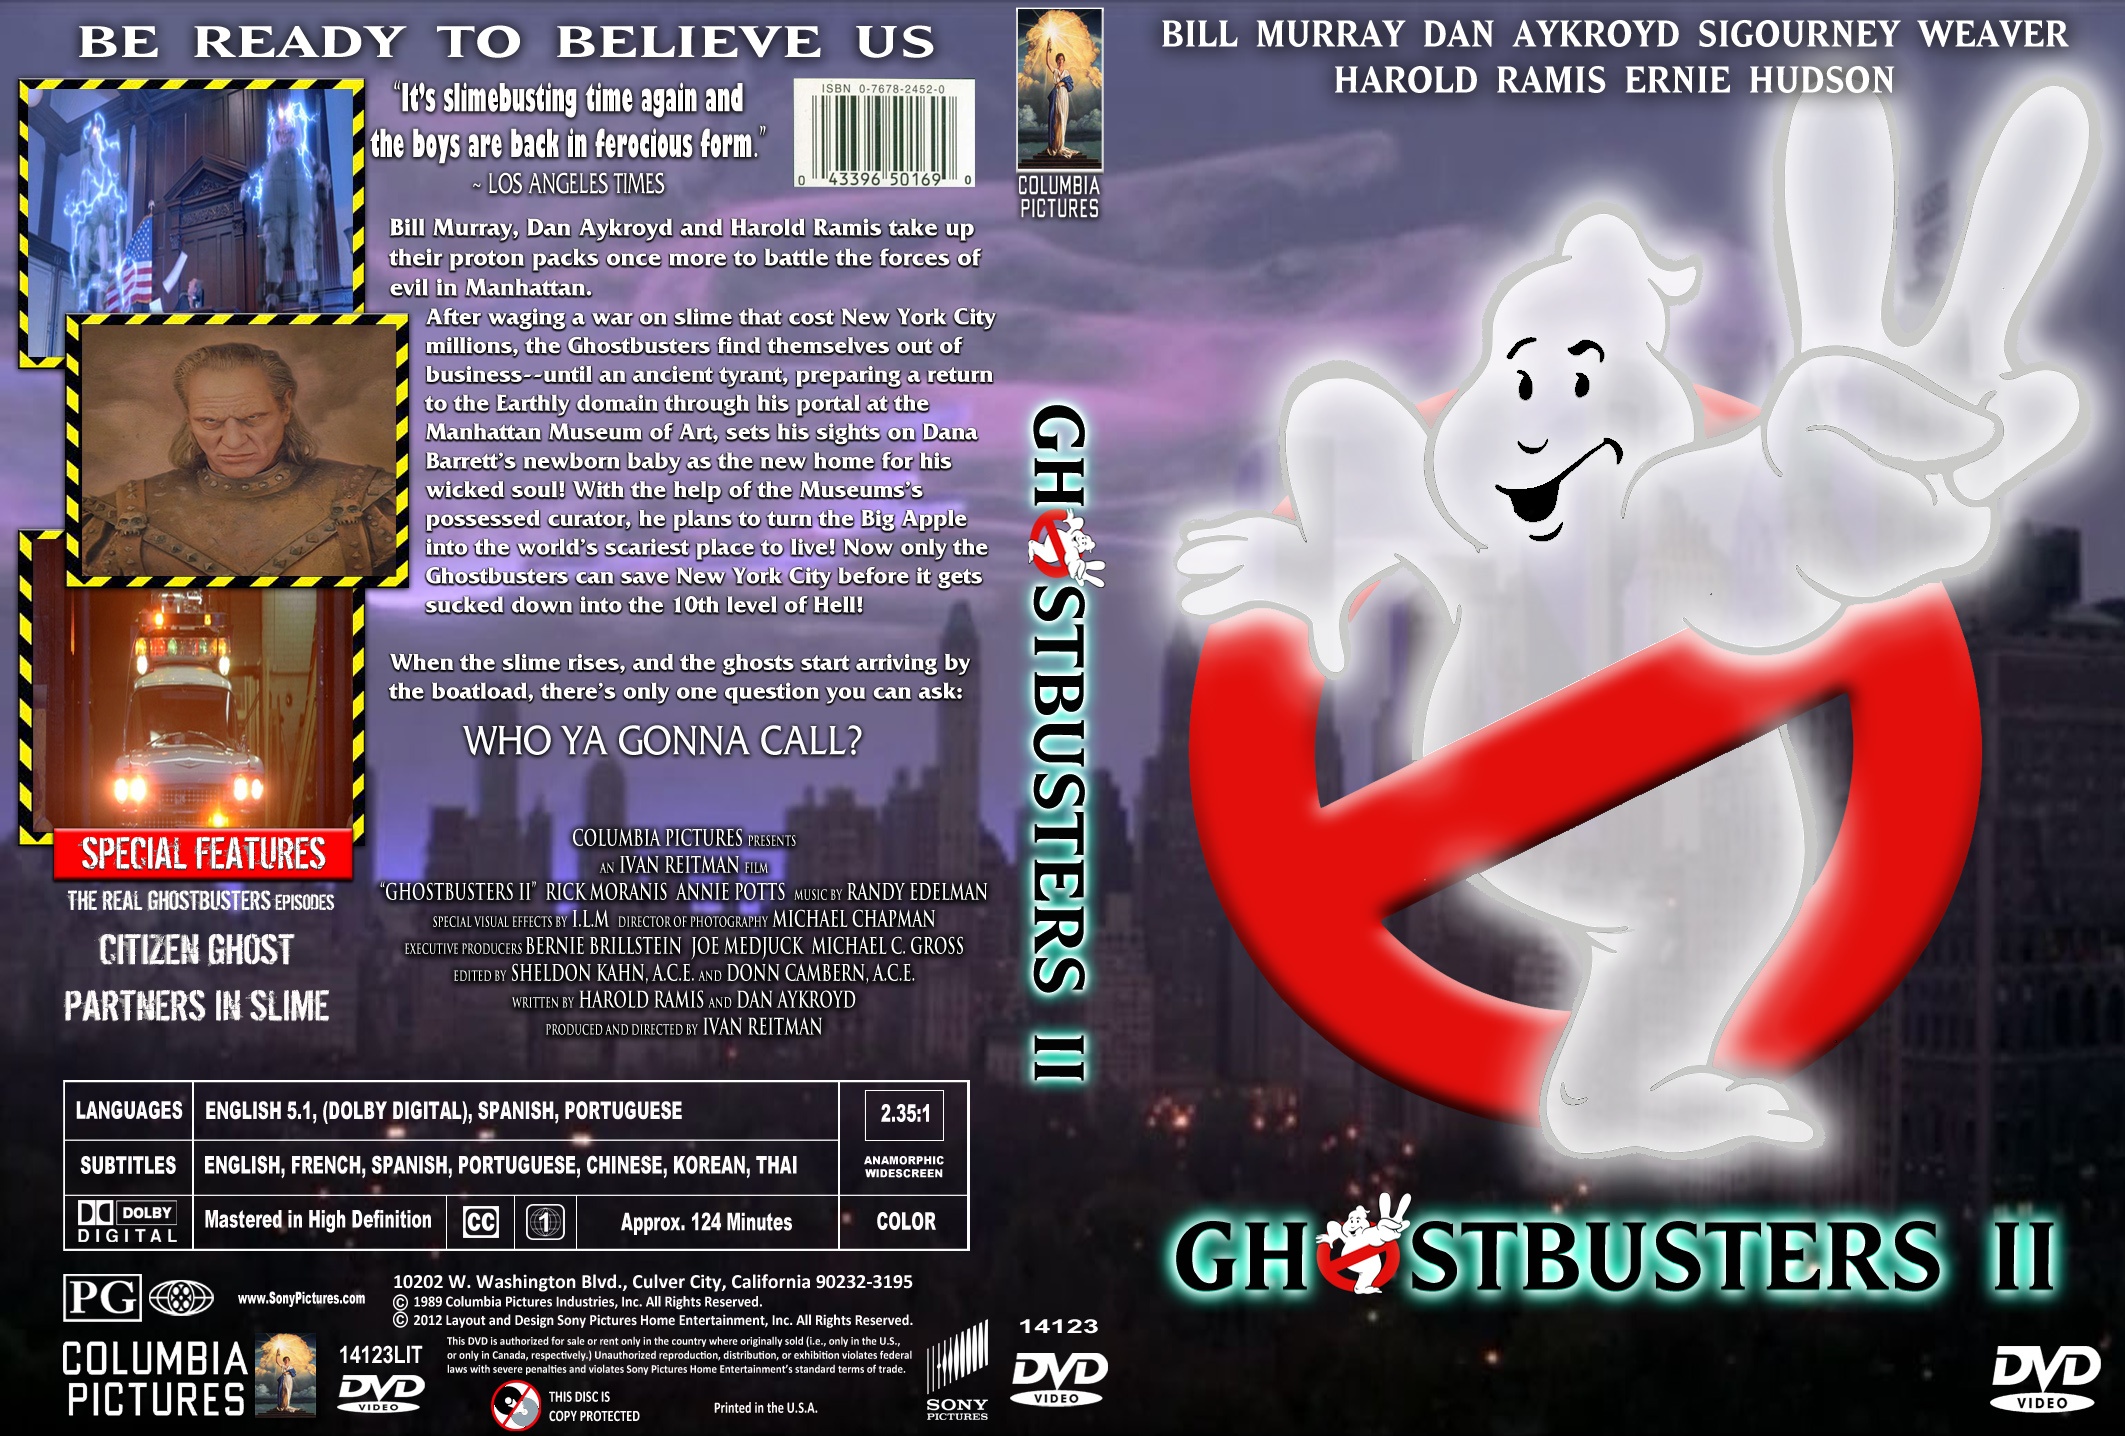 Ghostbusters II box cover